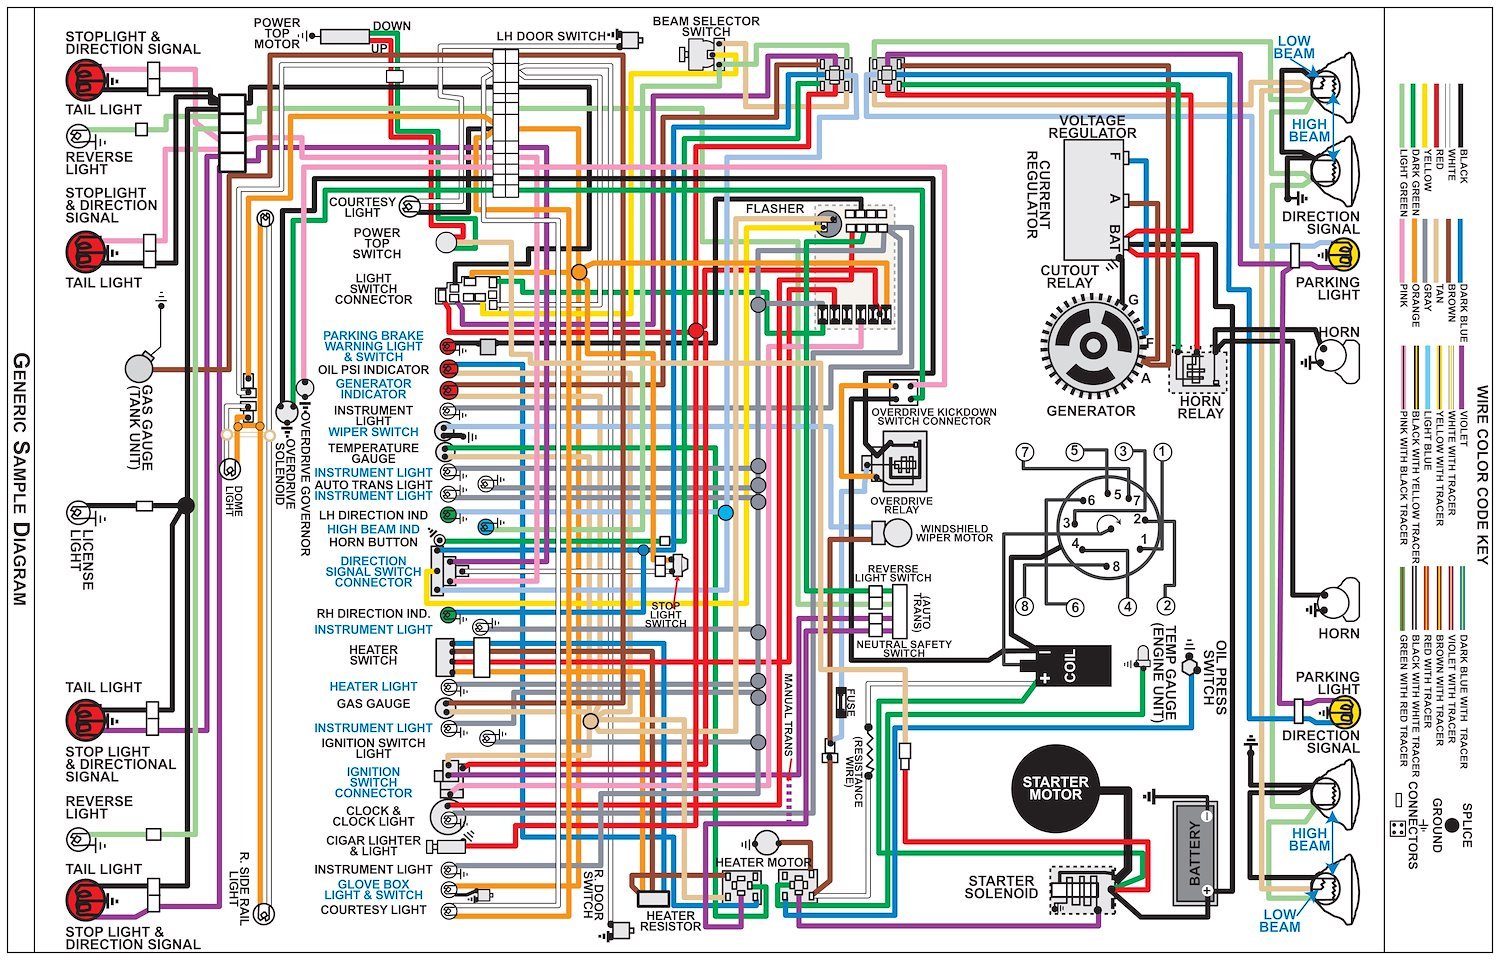 Wiring Diagram for 1970 Dodge Challenger with HEMI Engine, 11 in x 17 in., Laminated